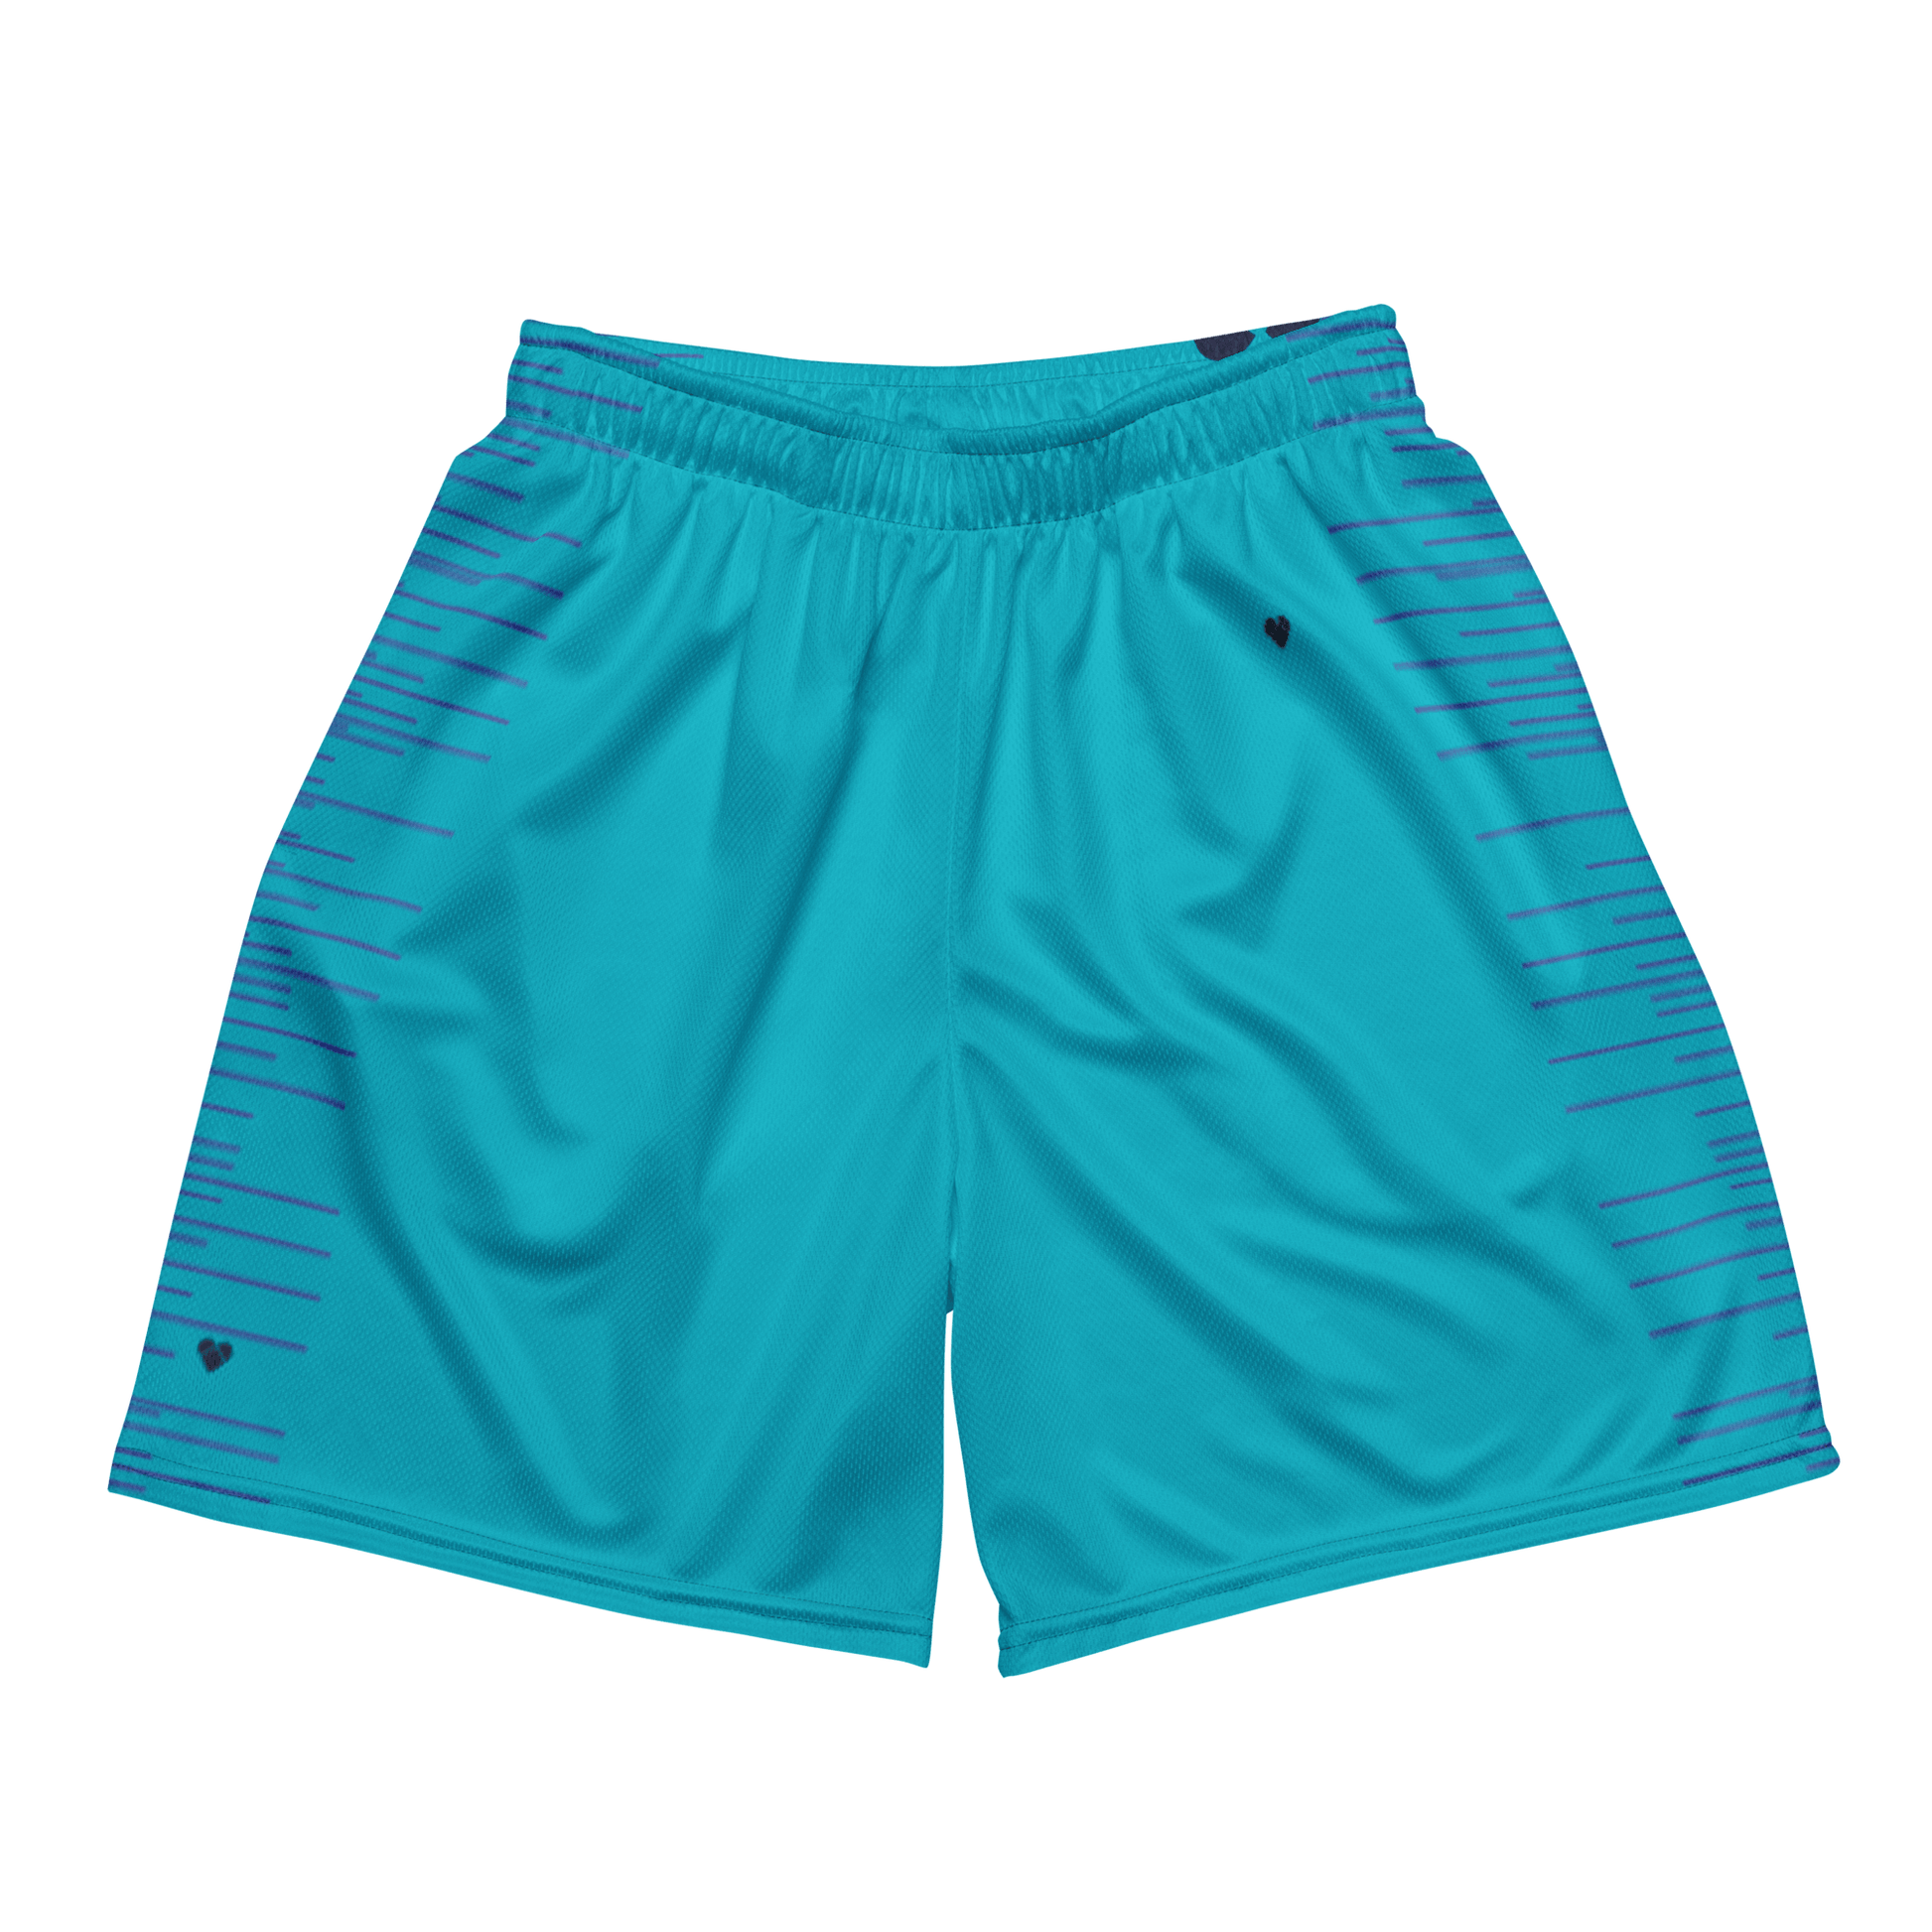 Turquoise Dual Mesh Shorts - Unleash your style with CRiZ AMOR's genderless comfort